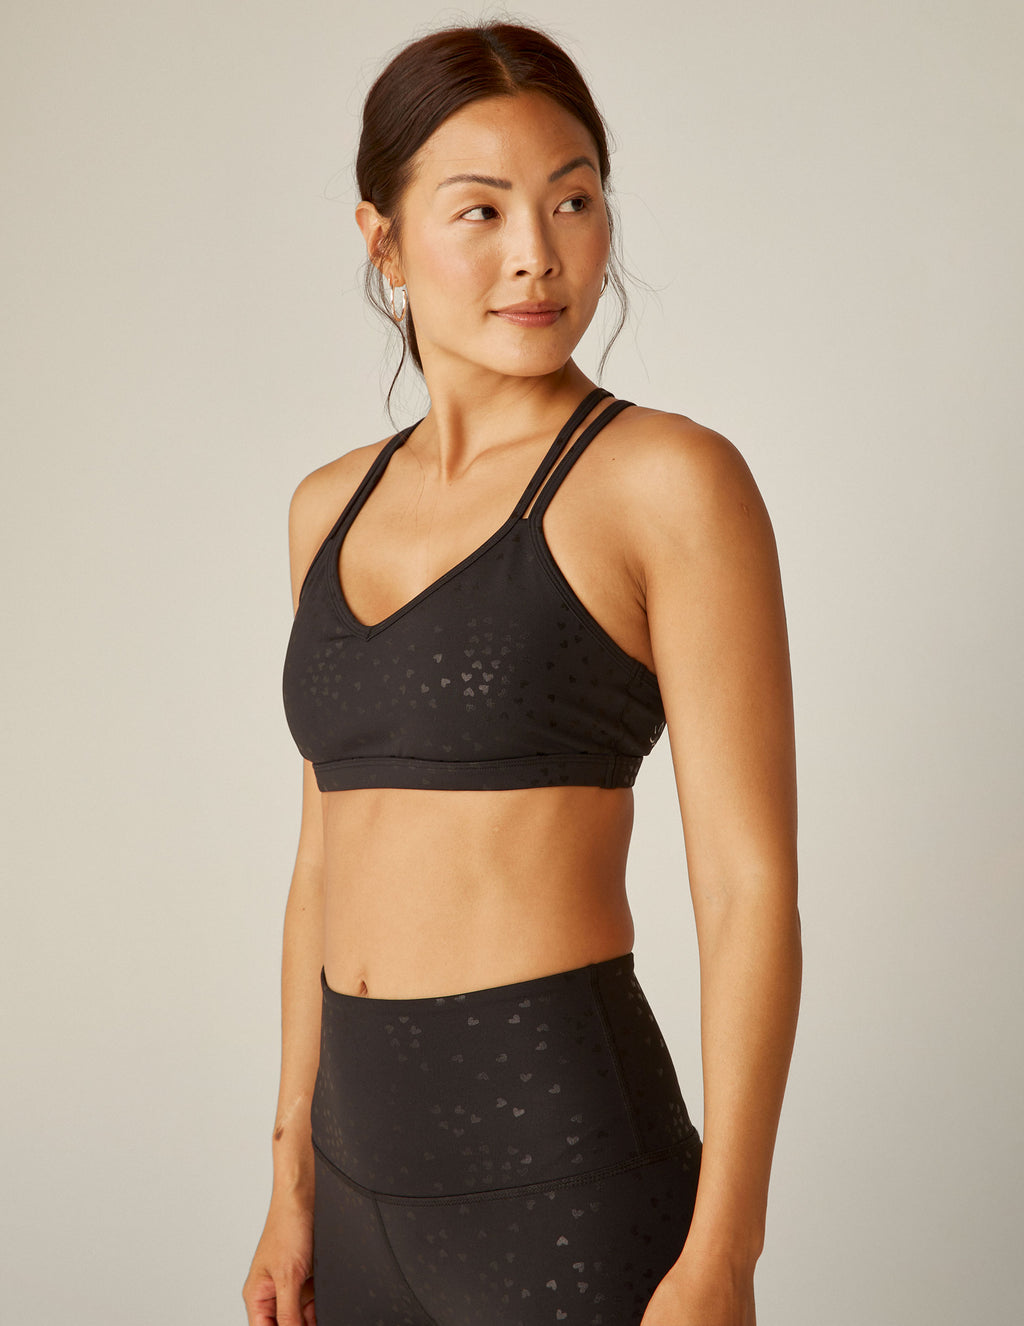 Cross Thin Straps Yoga Bra With Removable Cups Classic Beyond Yoga Sports  Bra For Womens Fitness And Sexy Style Un228A From Ai818, $12.78